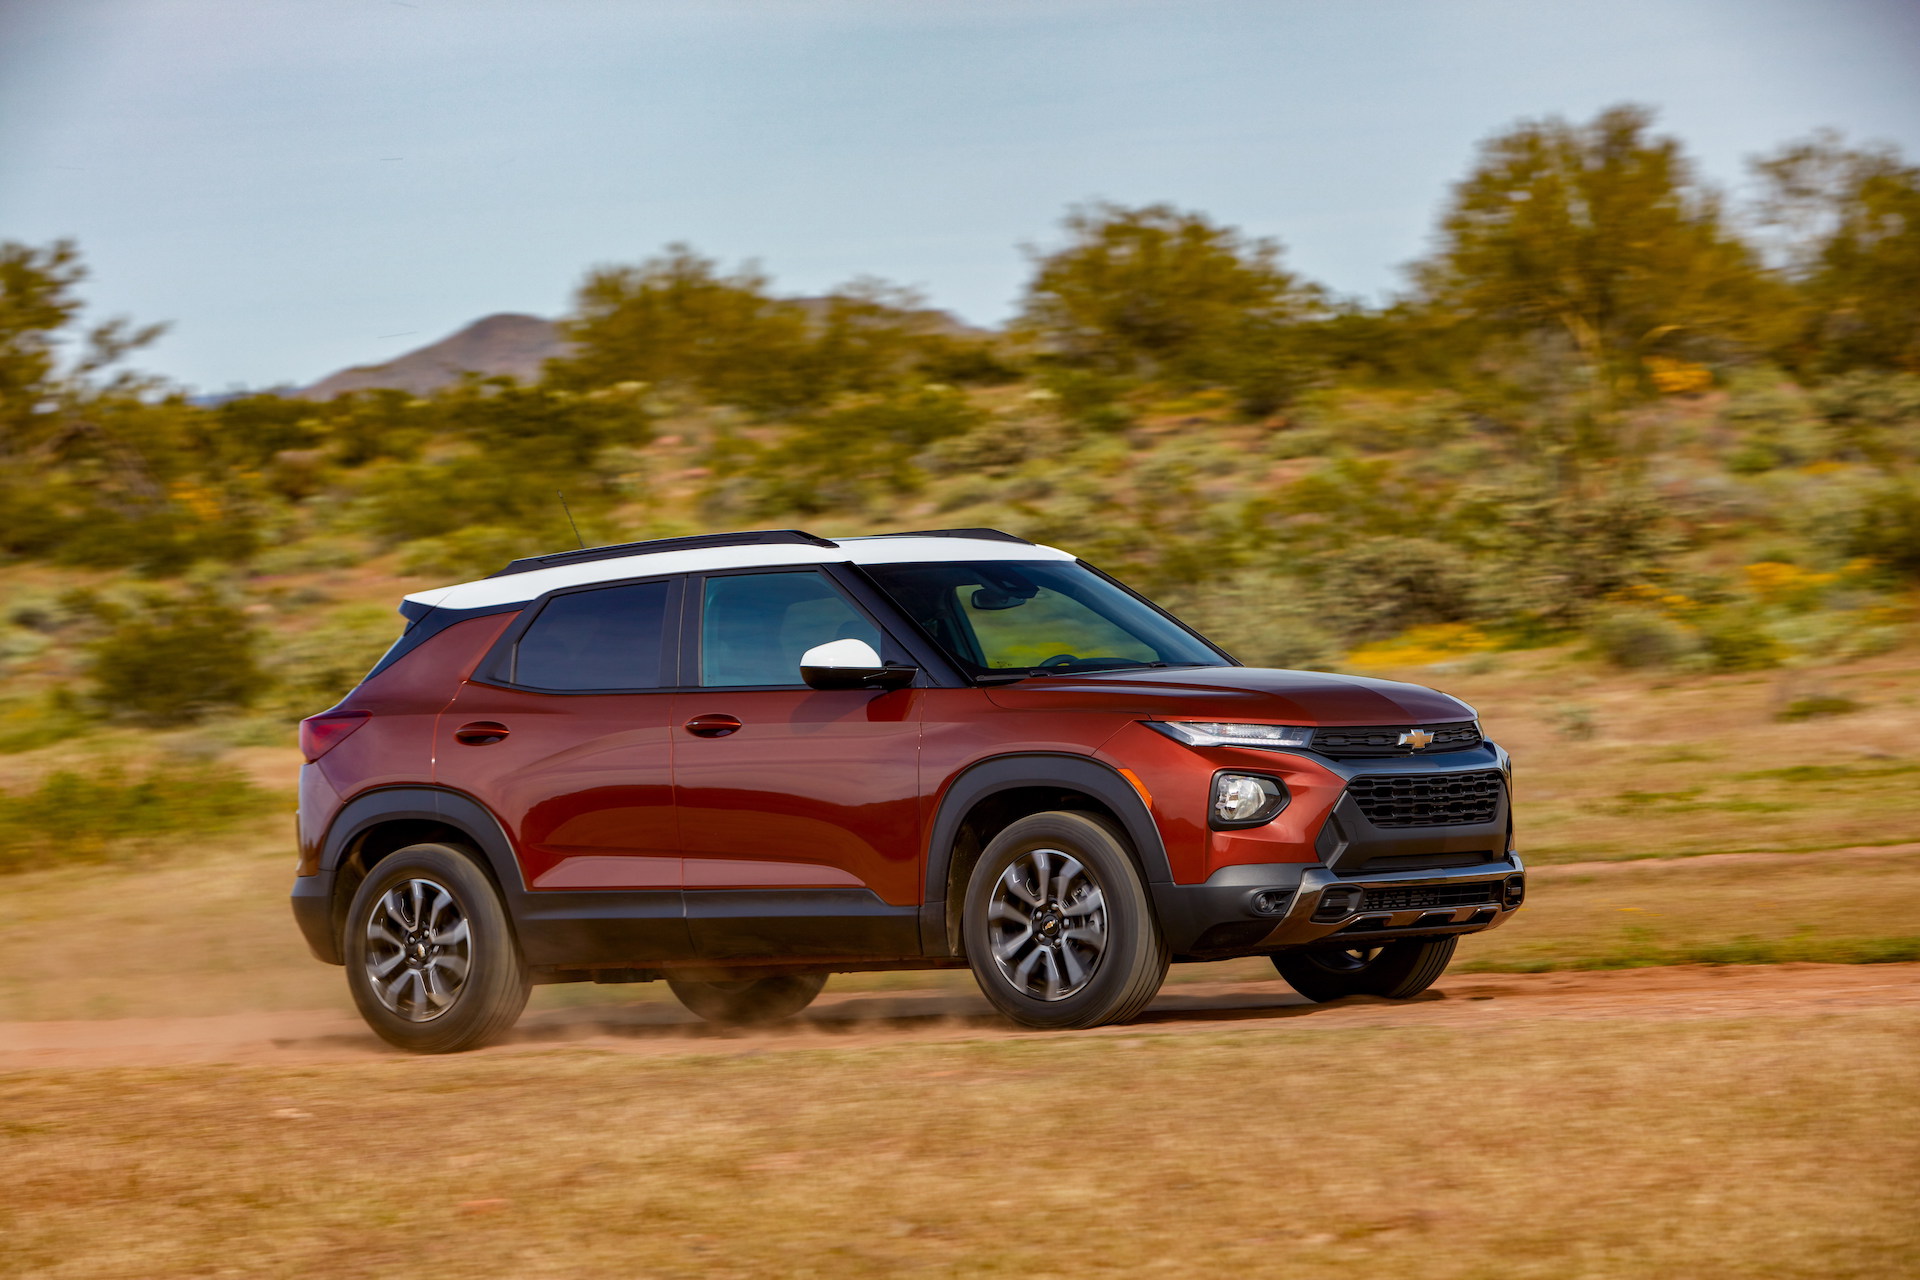 2022 Chevrolet TrailBlazer (Chevy) Review, Ratings, Specs, Prices, and